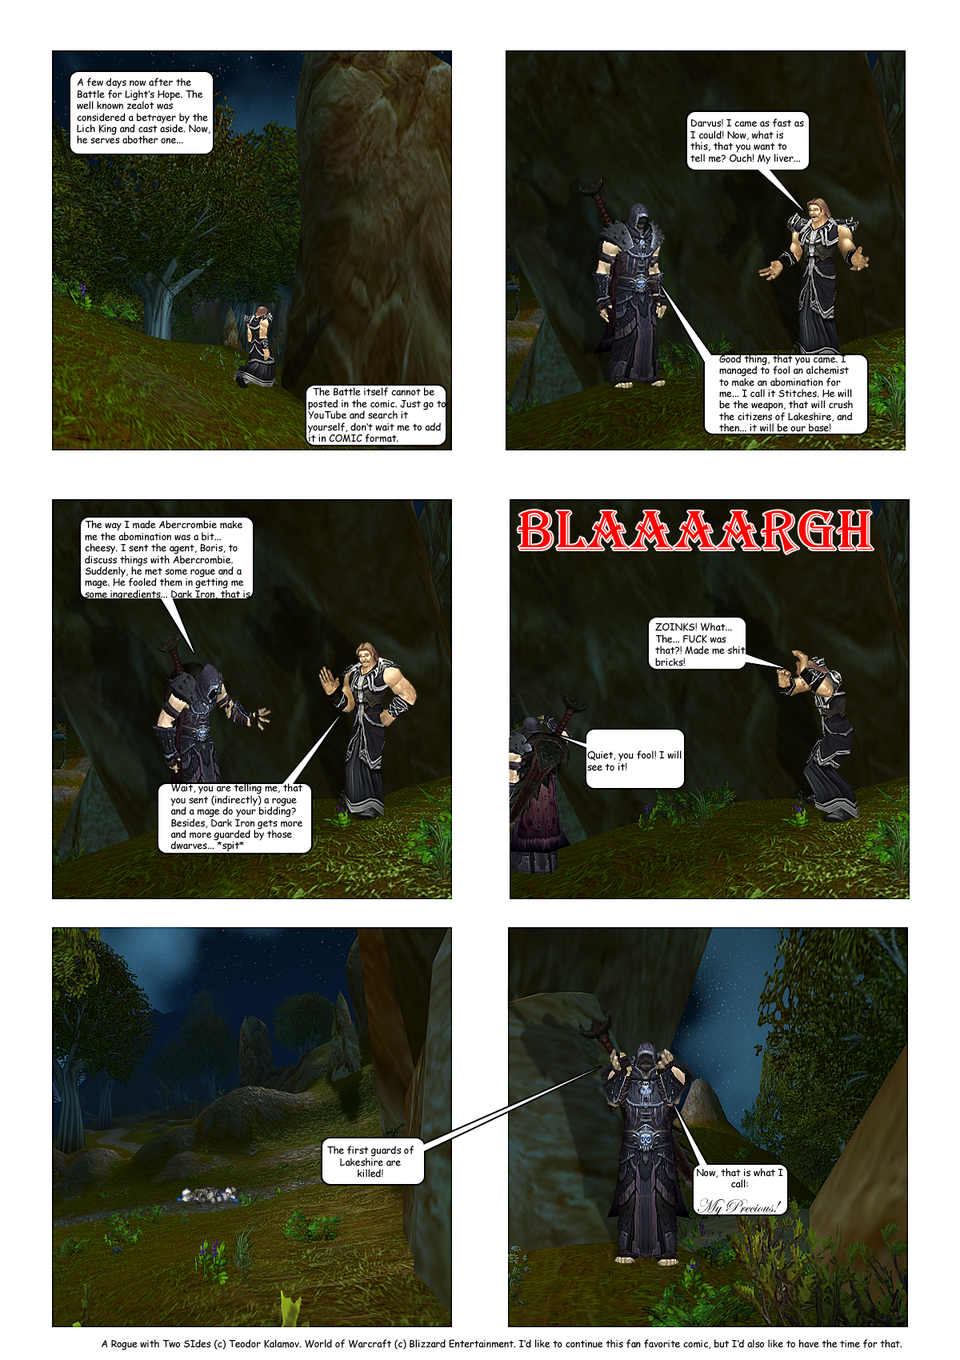 Page 48 - Evil plots and evil dragons